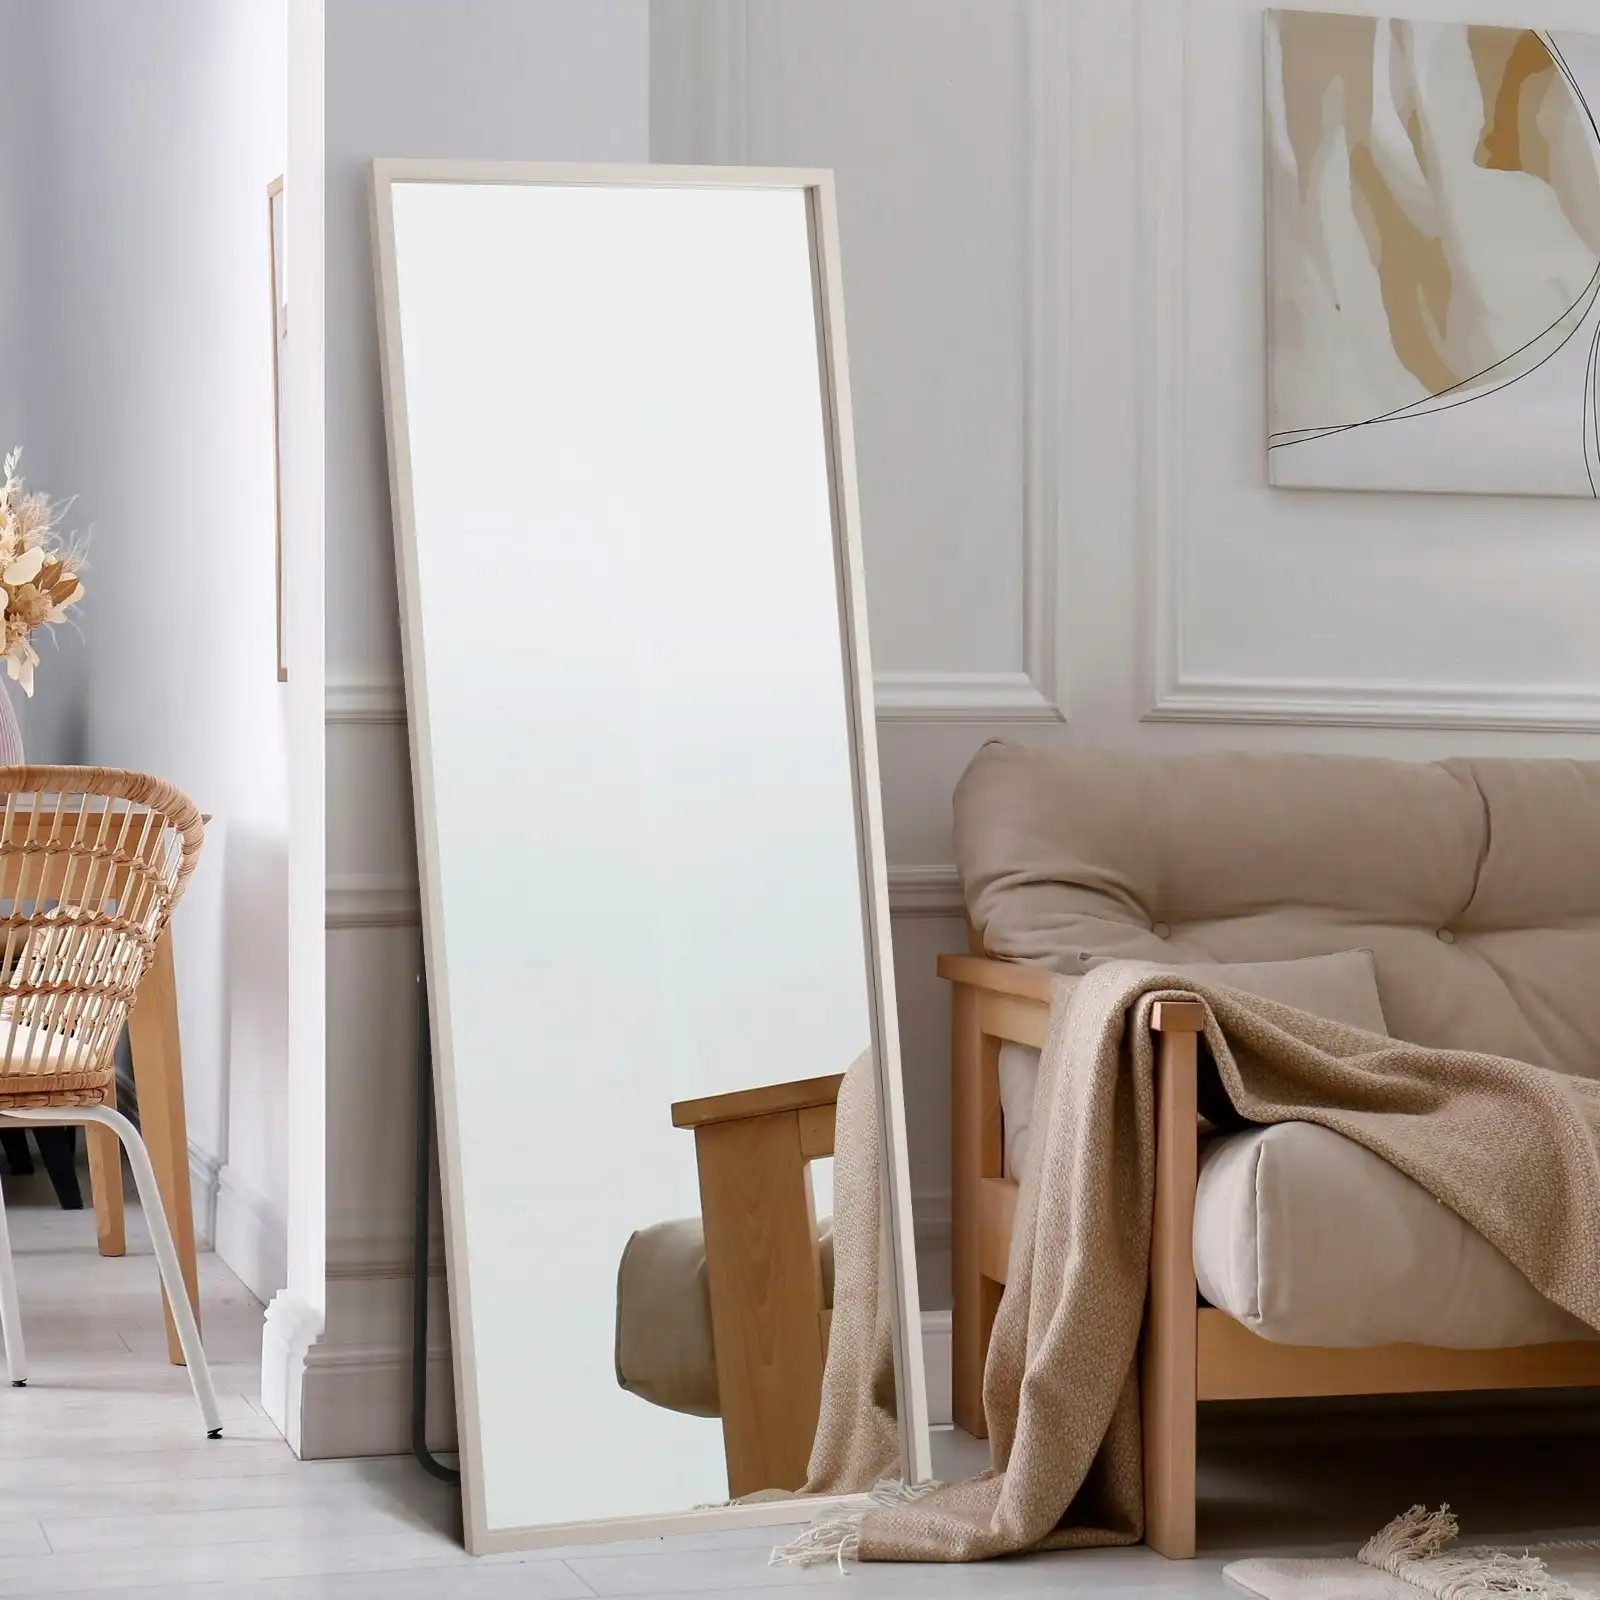 Oikiture Wooden 166x60cm Full Length Mirror Rectangle Floor Mirrors Free Standing White